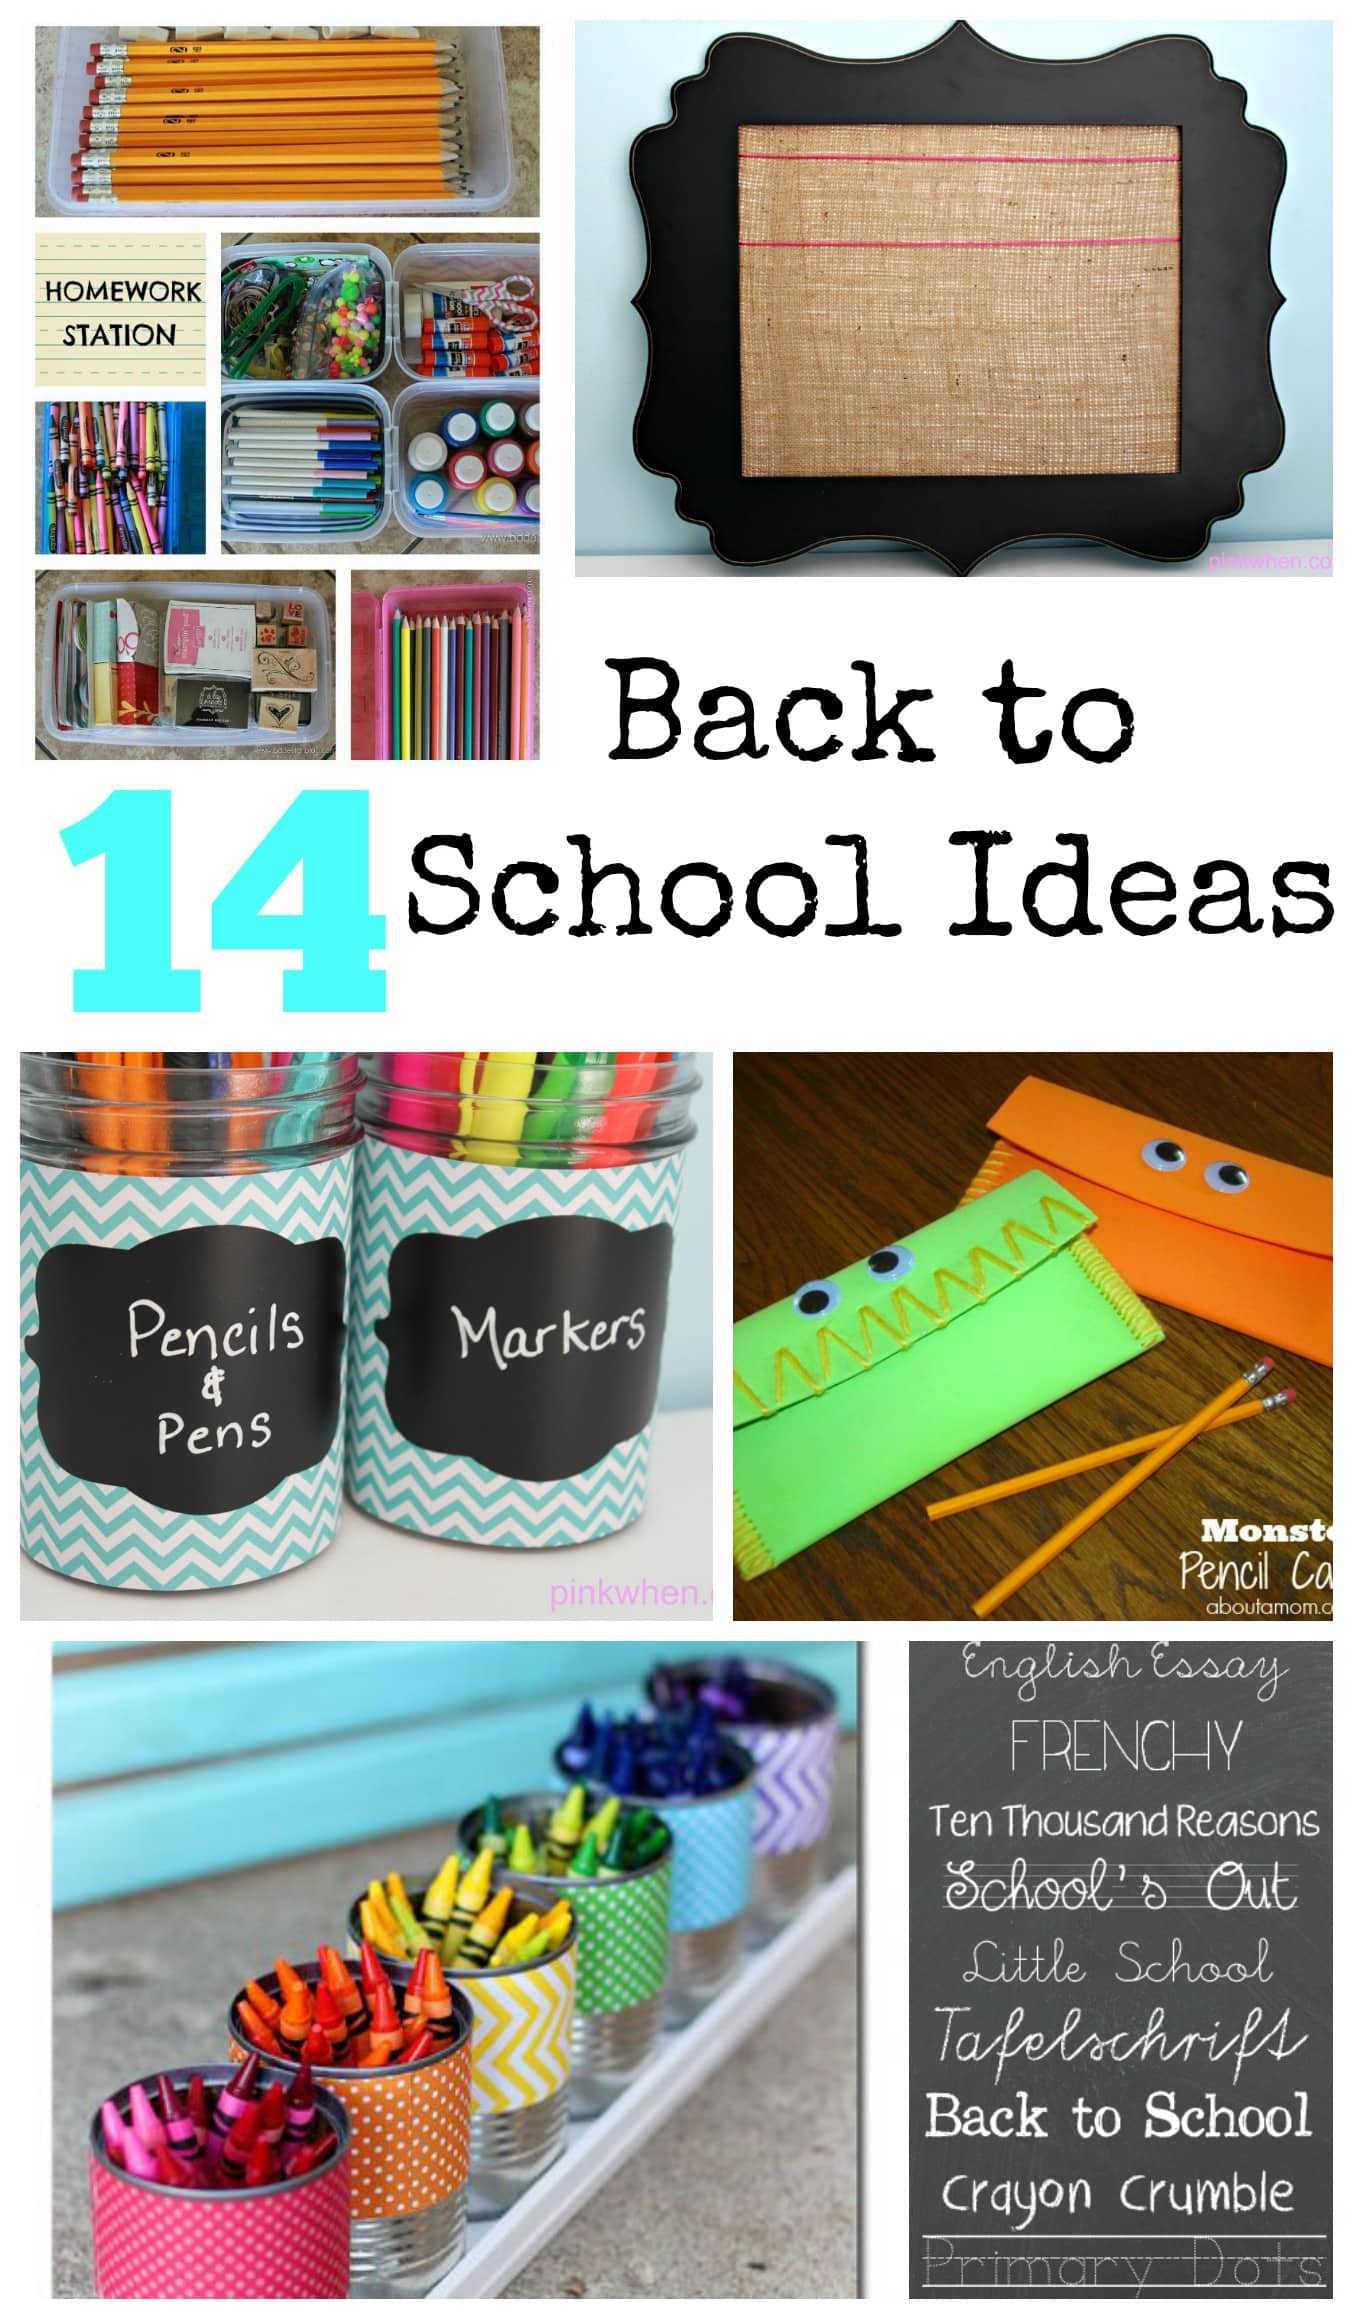 14 Must Have Back to School Ideas from PinkWhen.com